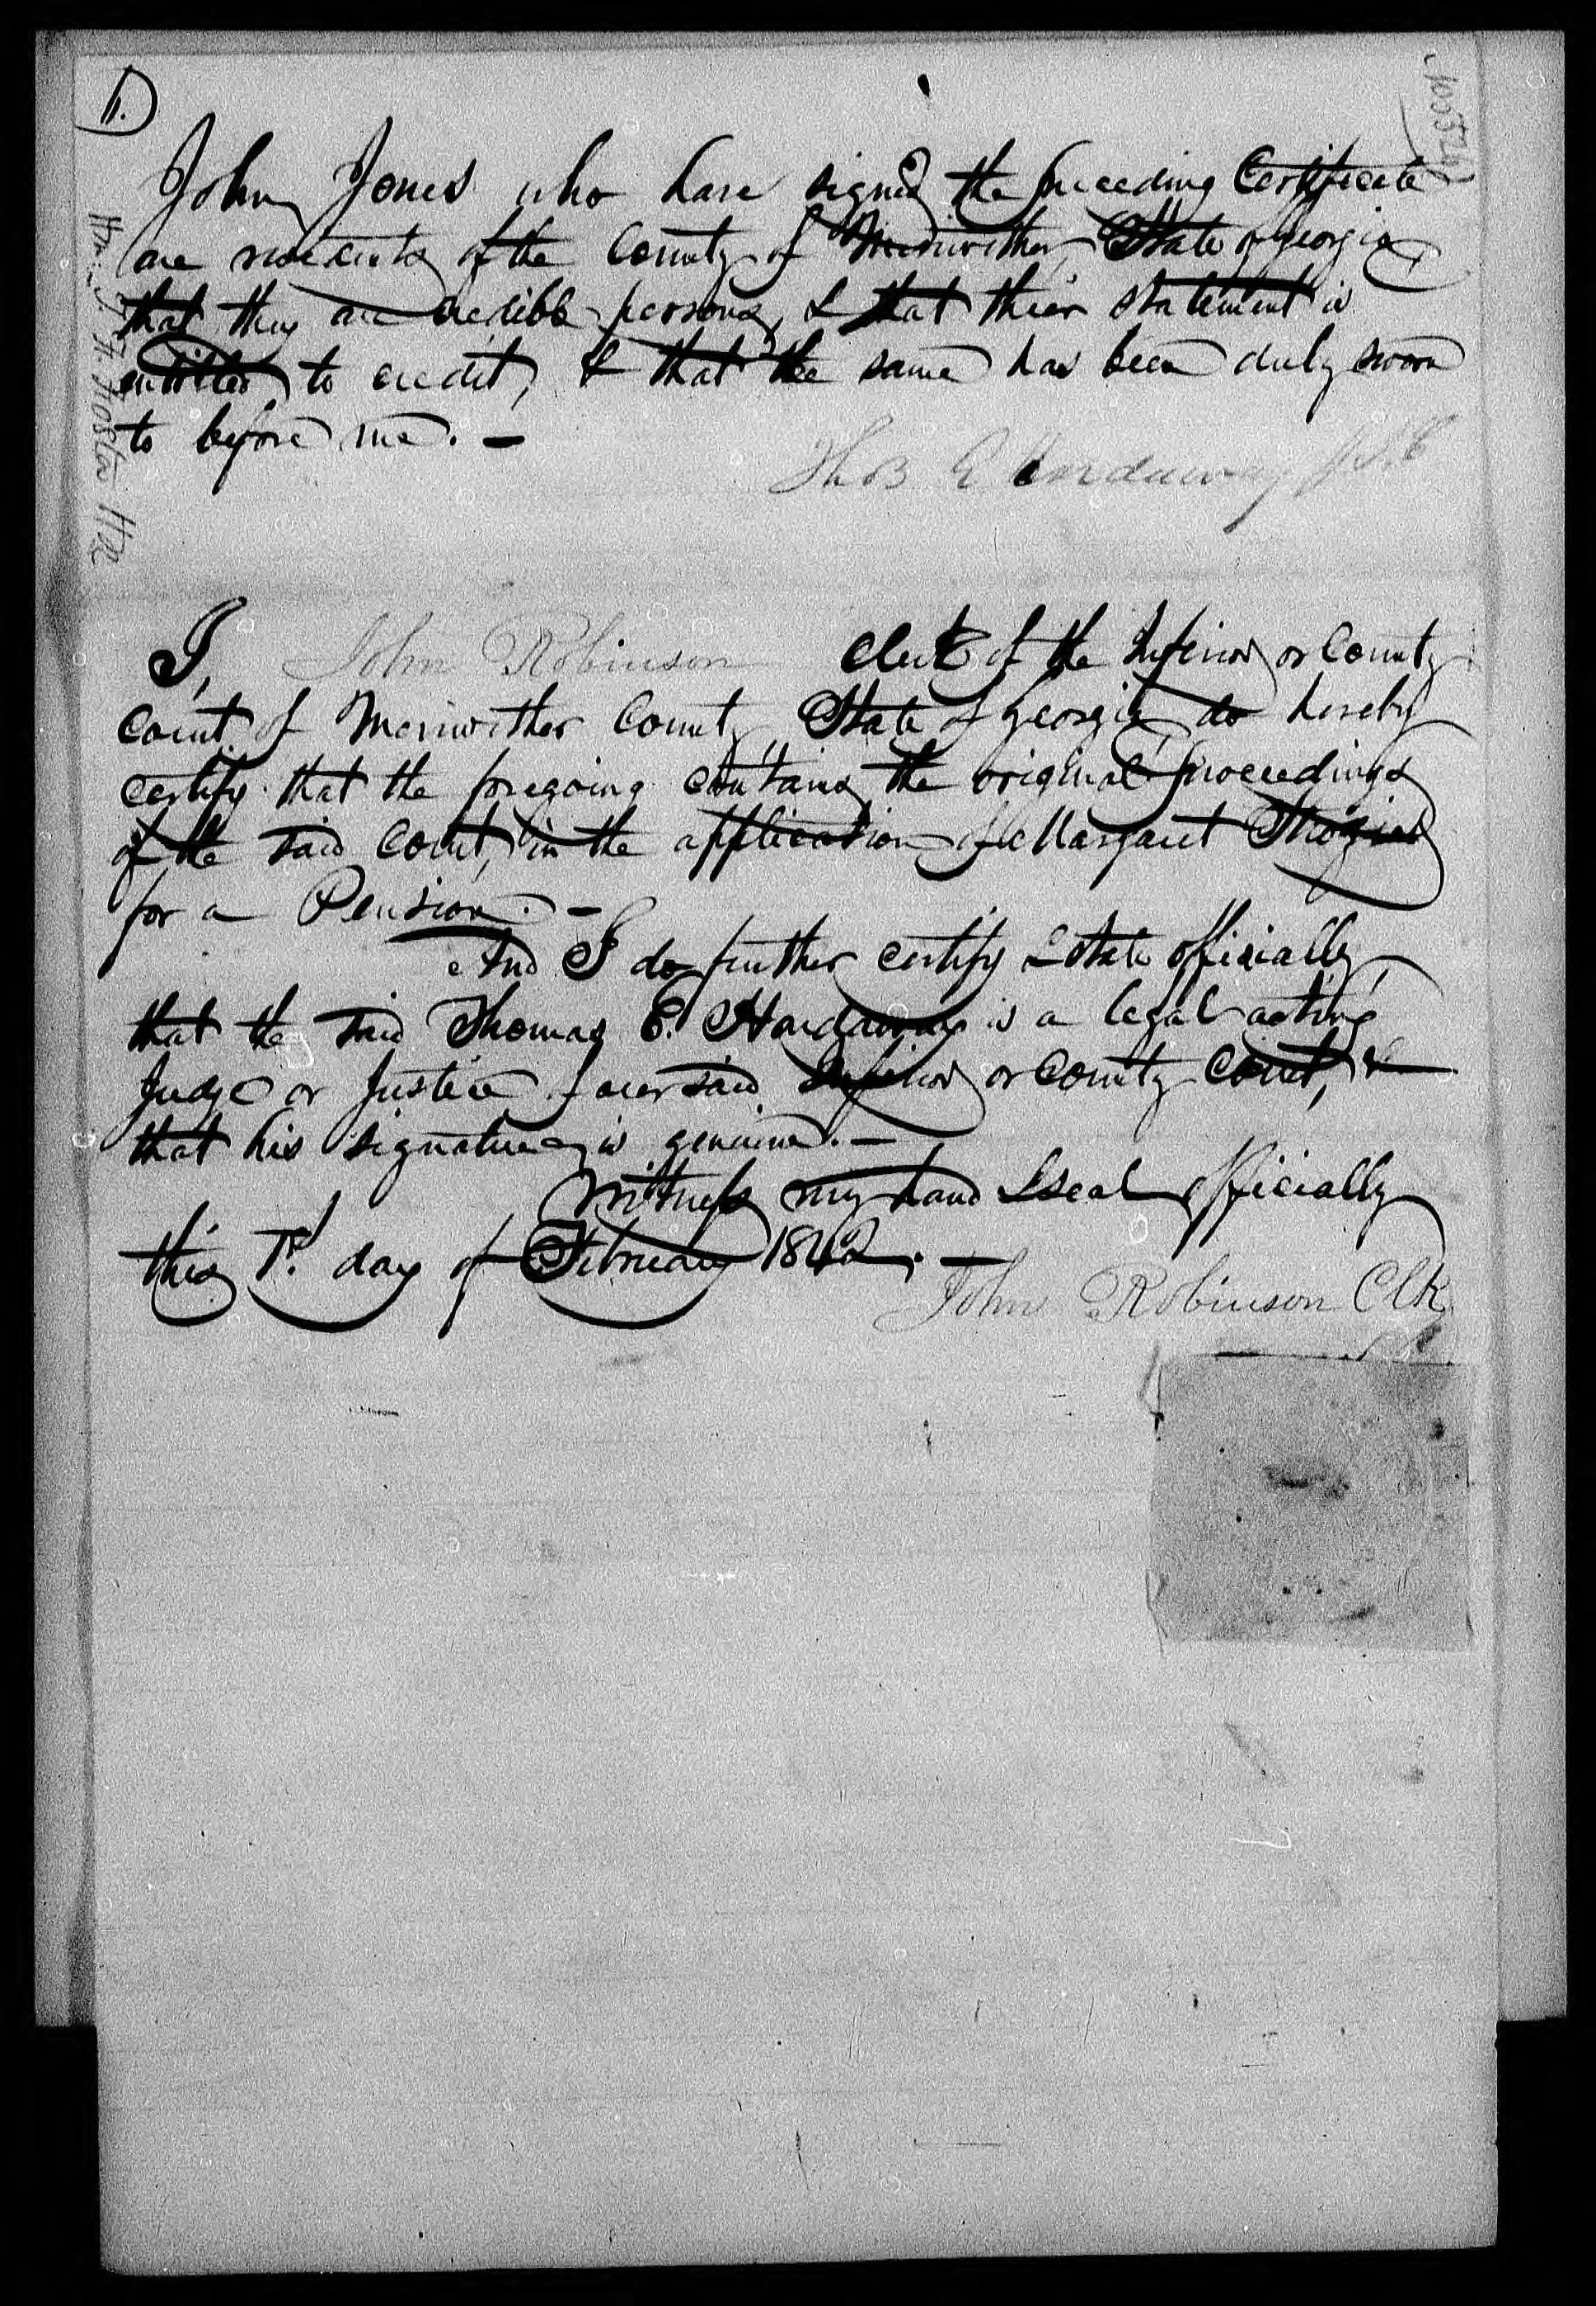 Application for a Widow's Pension from Margaret Strozier, 1 February 1842, page 6